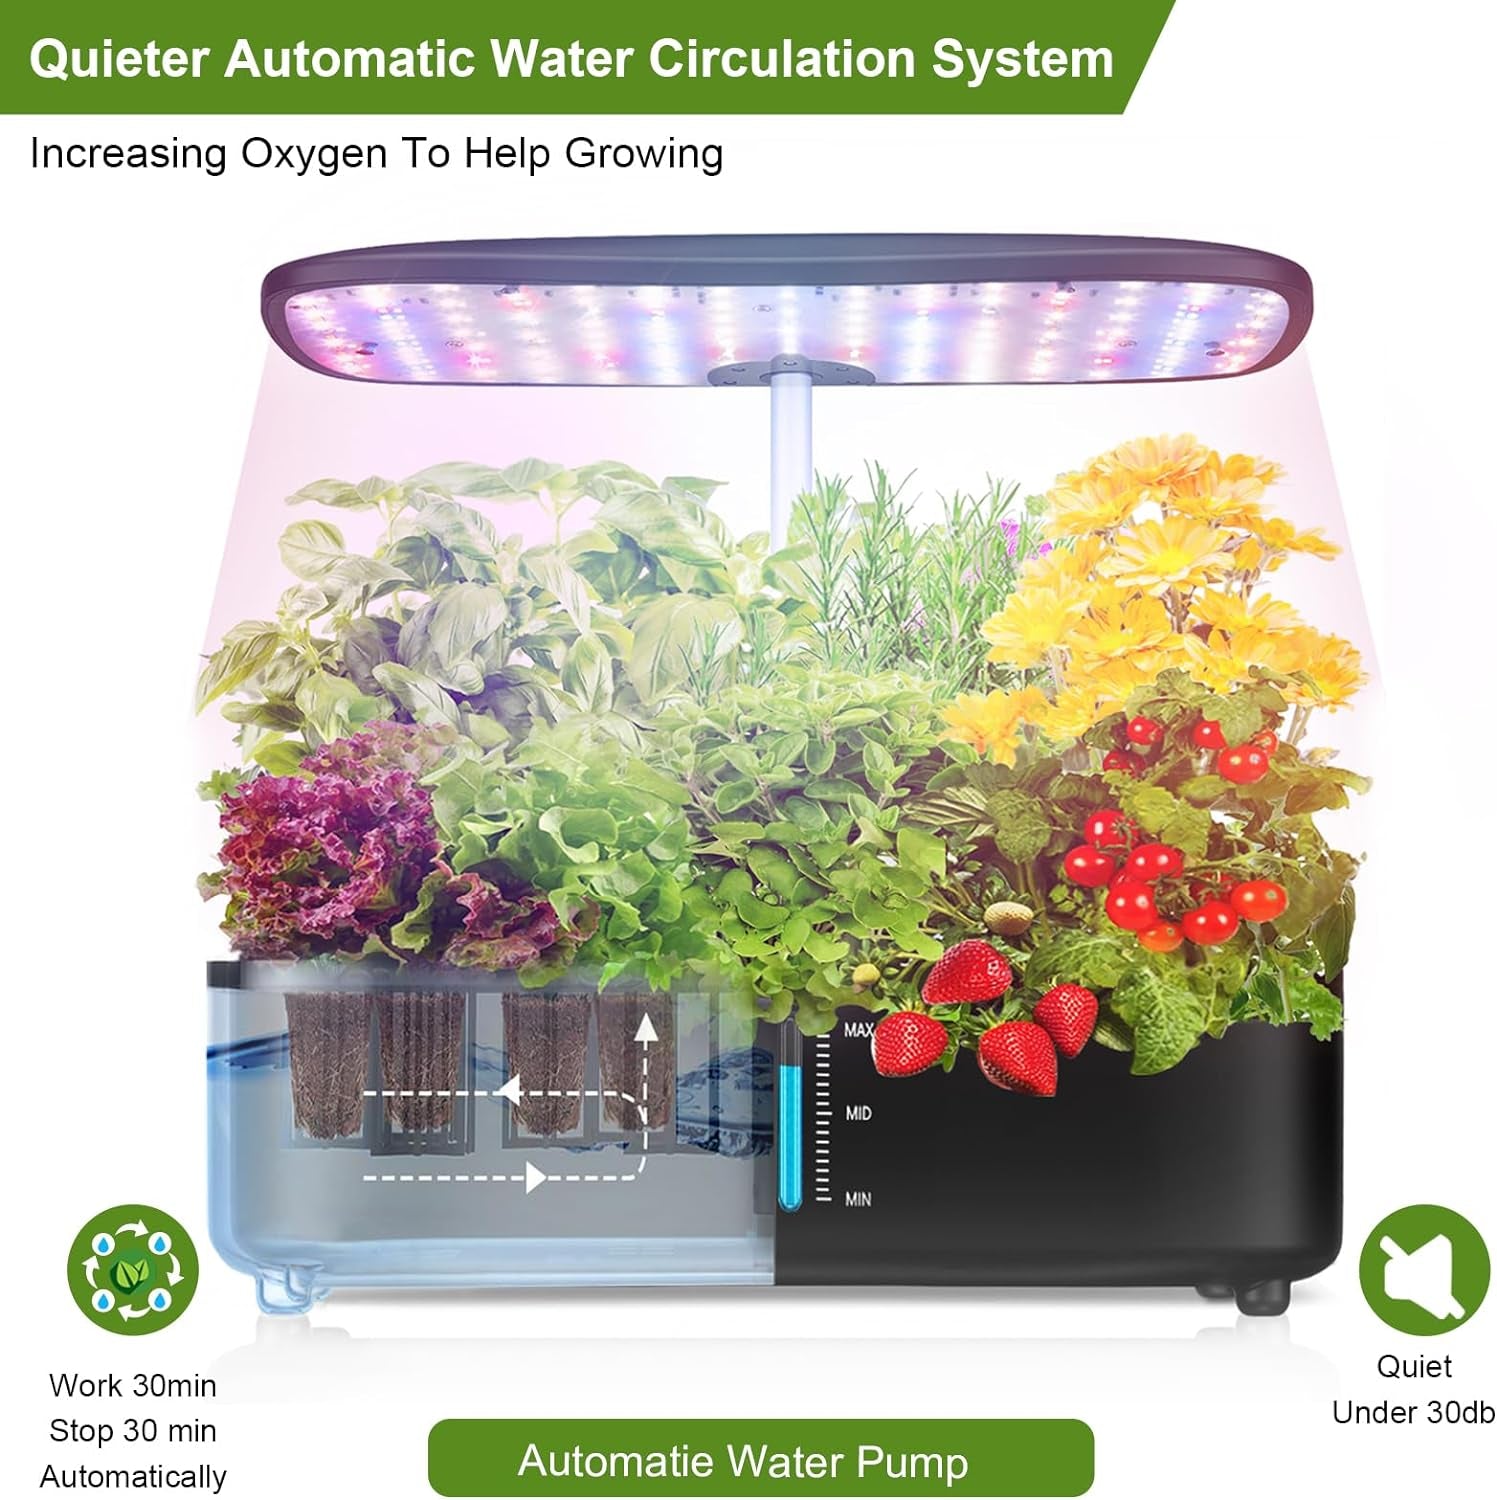 12-Pod Hydroponic Indoor Garden System with LED Grow Lights, Height Adjustable Planters, and Auto Timer for Herbs and Plants